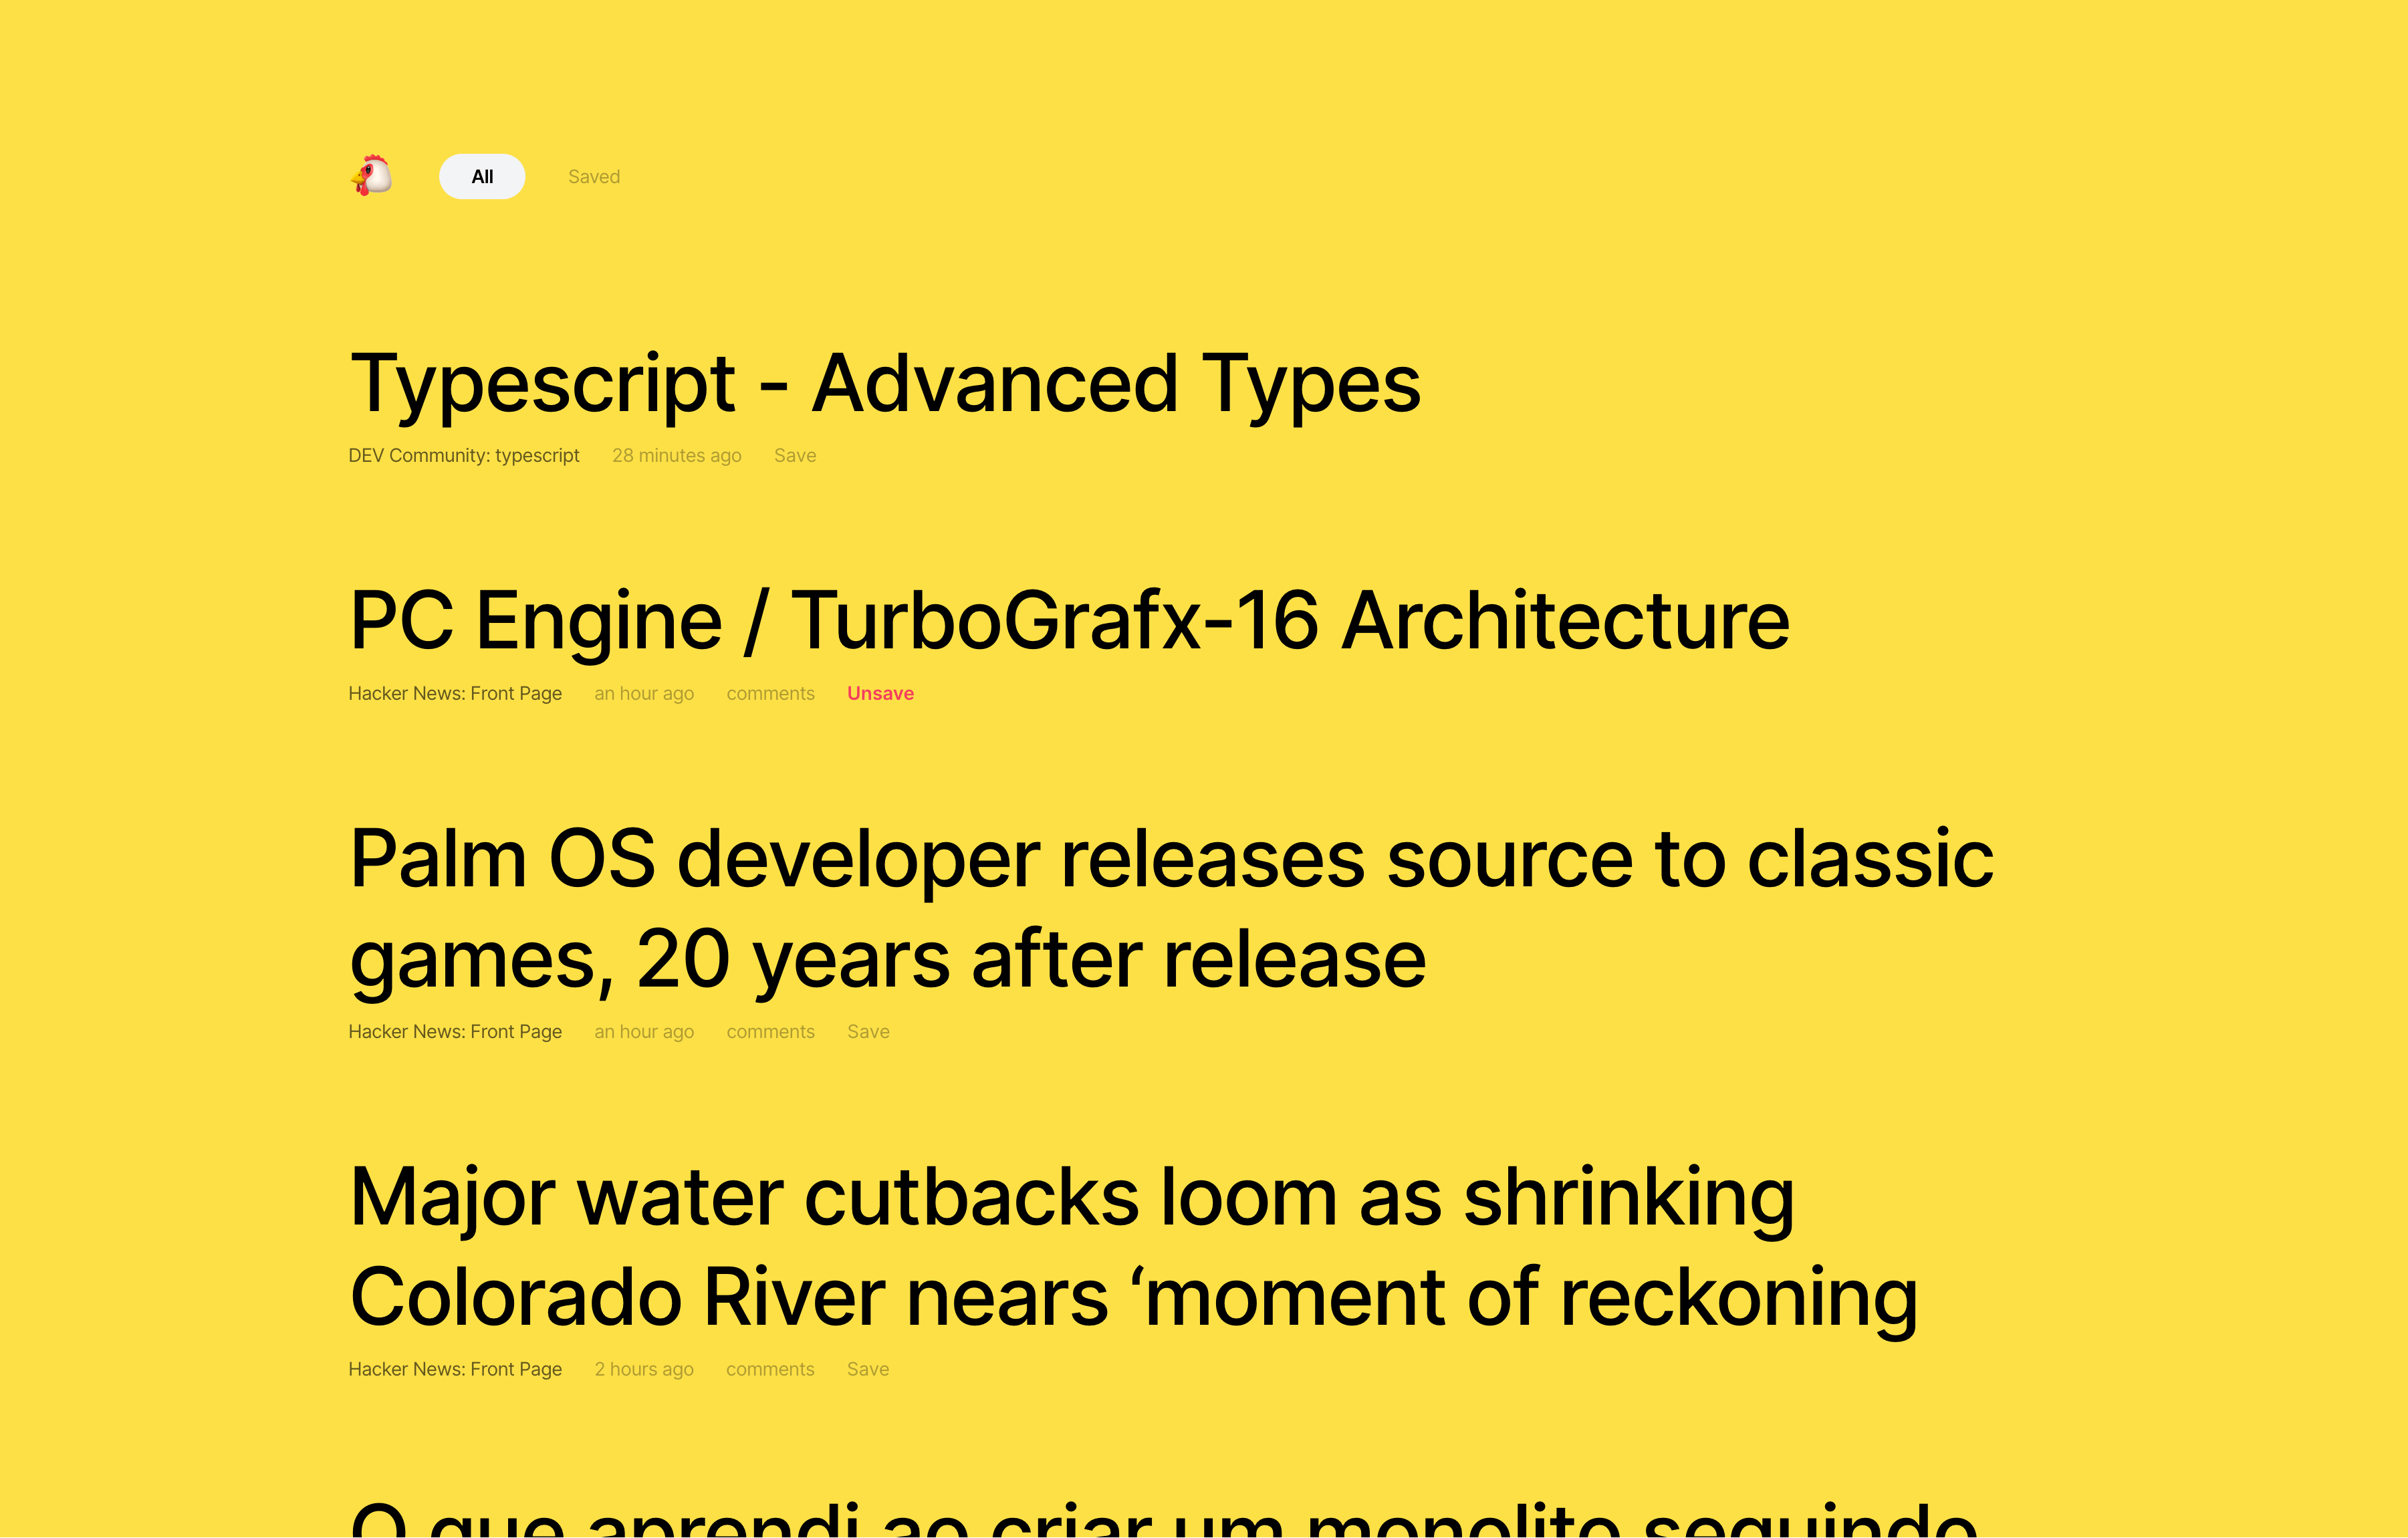 A screenshot of an RSS feed reader app built with React Server Components. There is a chicken icon in the top-left corner, as well as options to display all feed items and to display saved feed items. Below are blog titles with source names, the recency of when the item was posted, and a save option for each post.